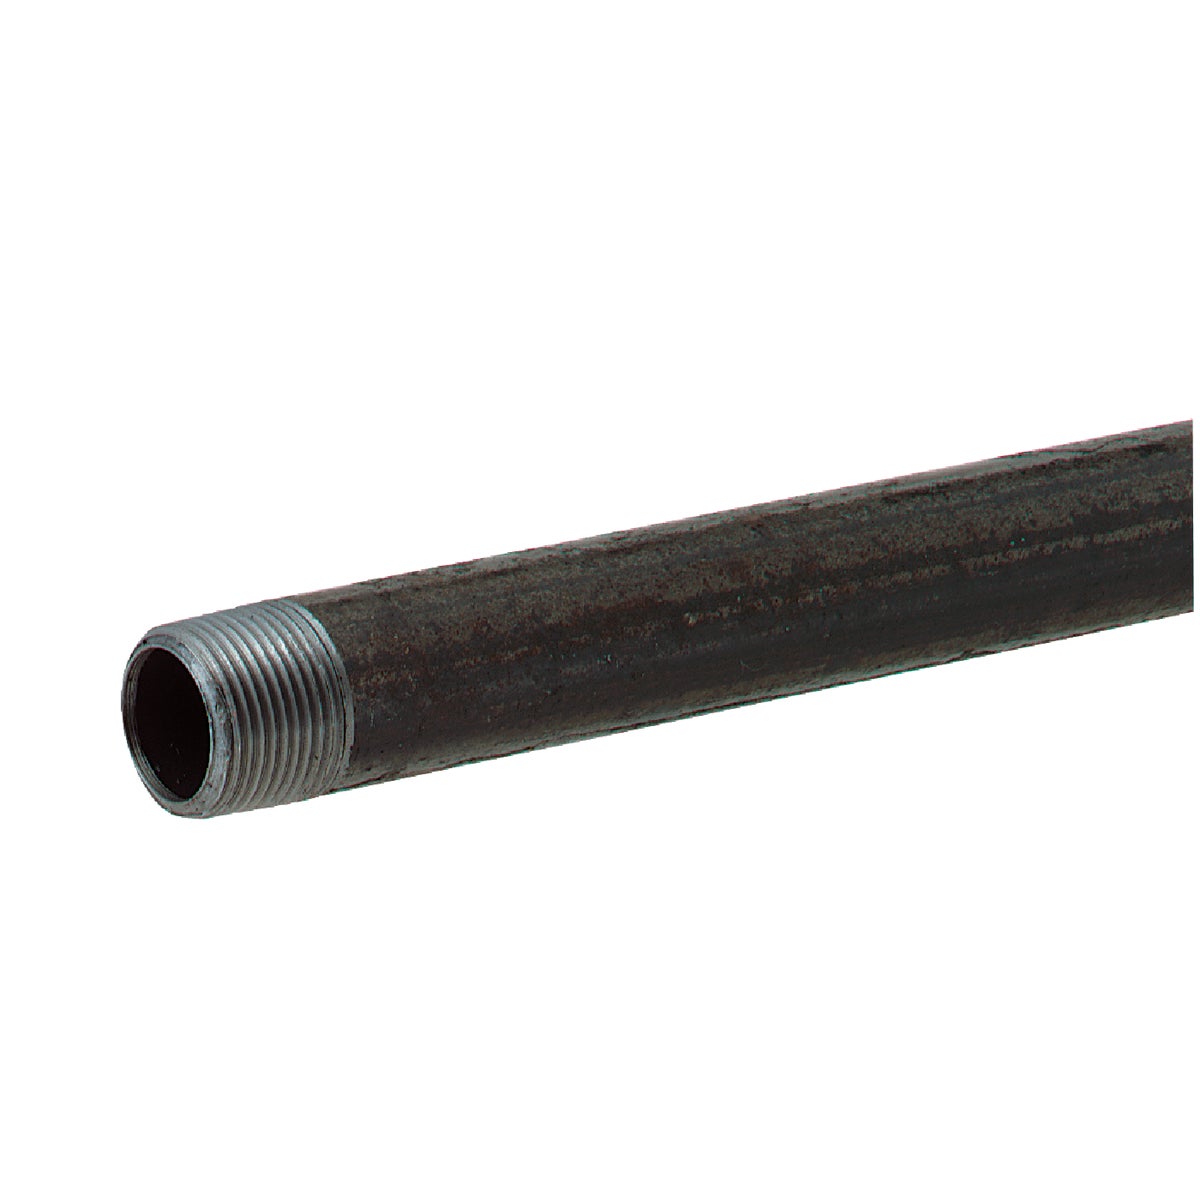 Southland 1-1/2 In. x 30 In. Carbon Steel Threaded Black Pipe